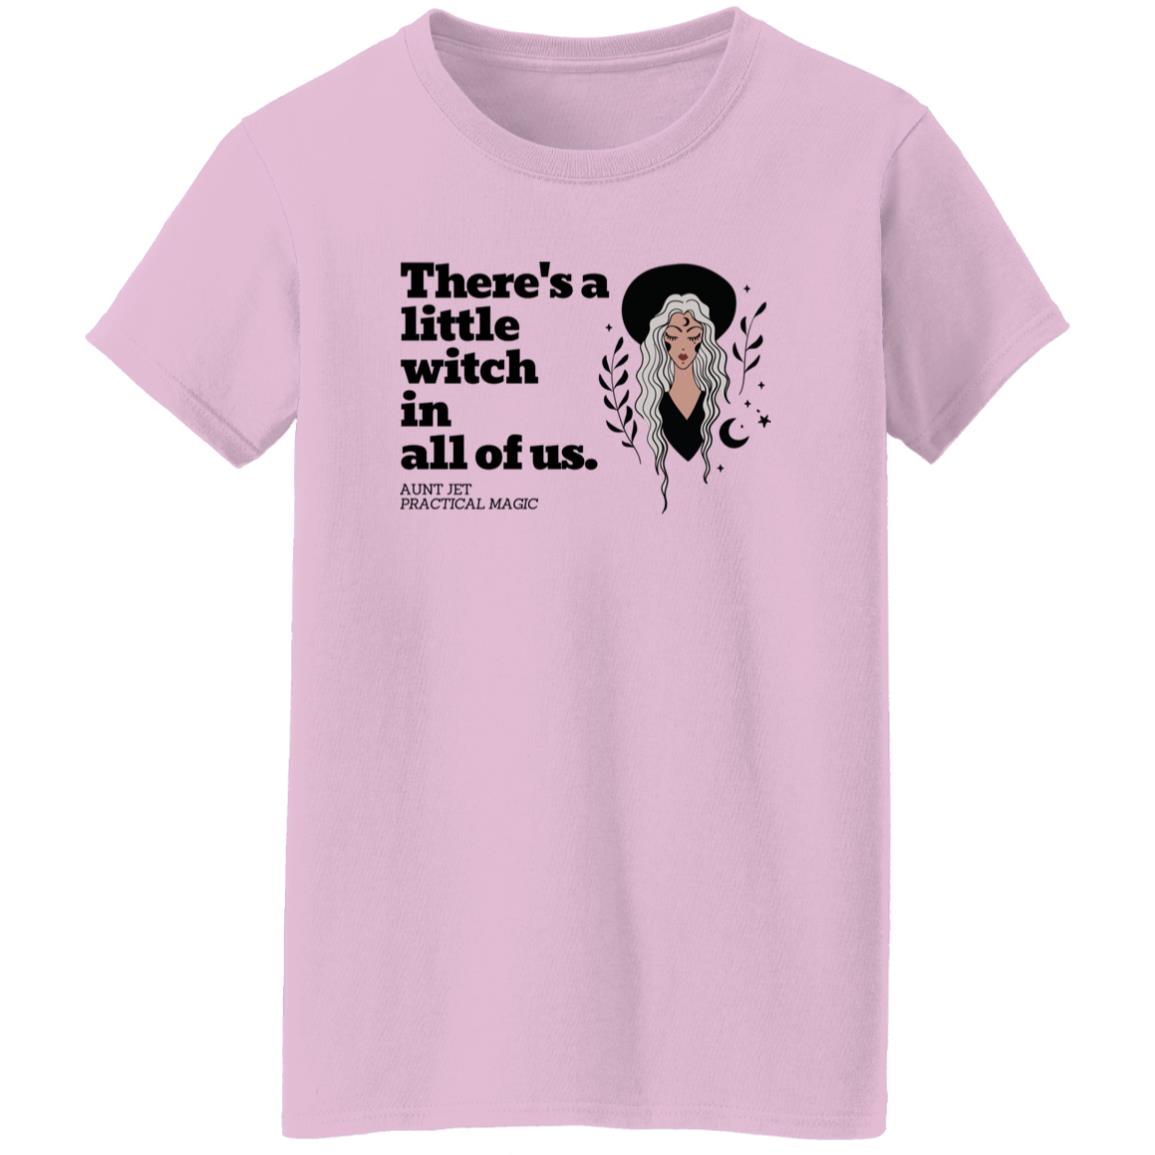 There's a little witch in all of us. T-Shirt